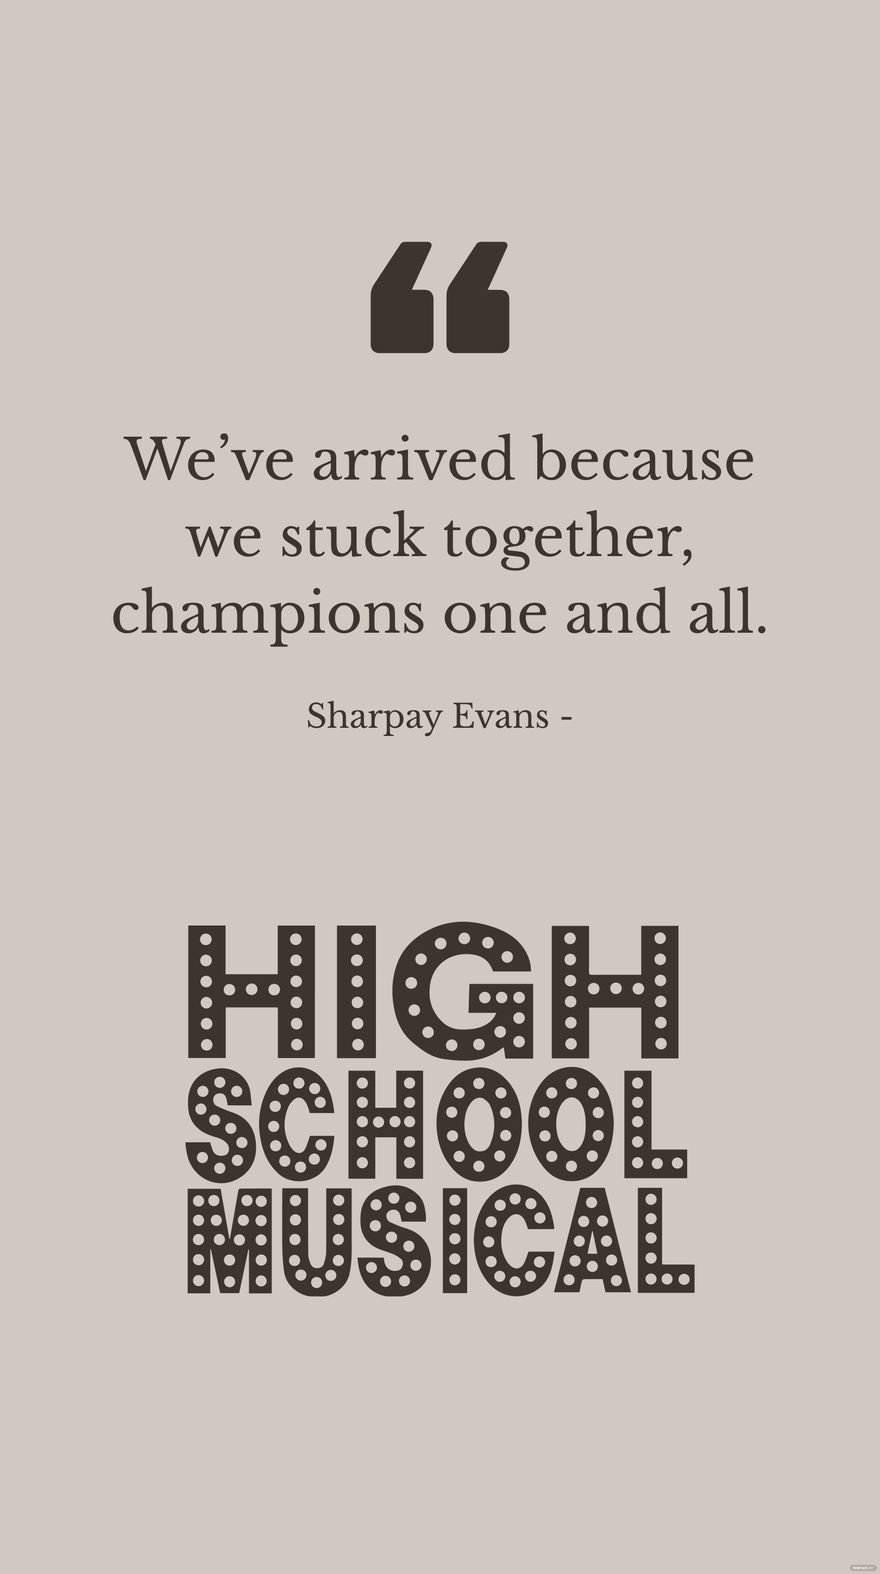 Sharpay Evans - We’ve arrived because we stuck together, champions one and all. in JPG